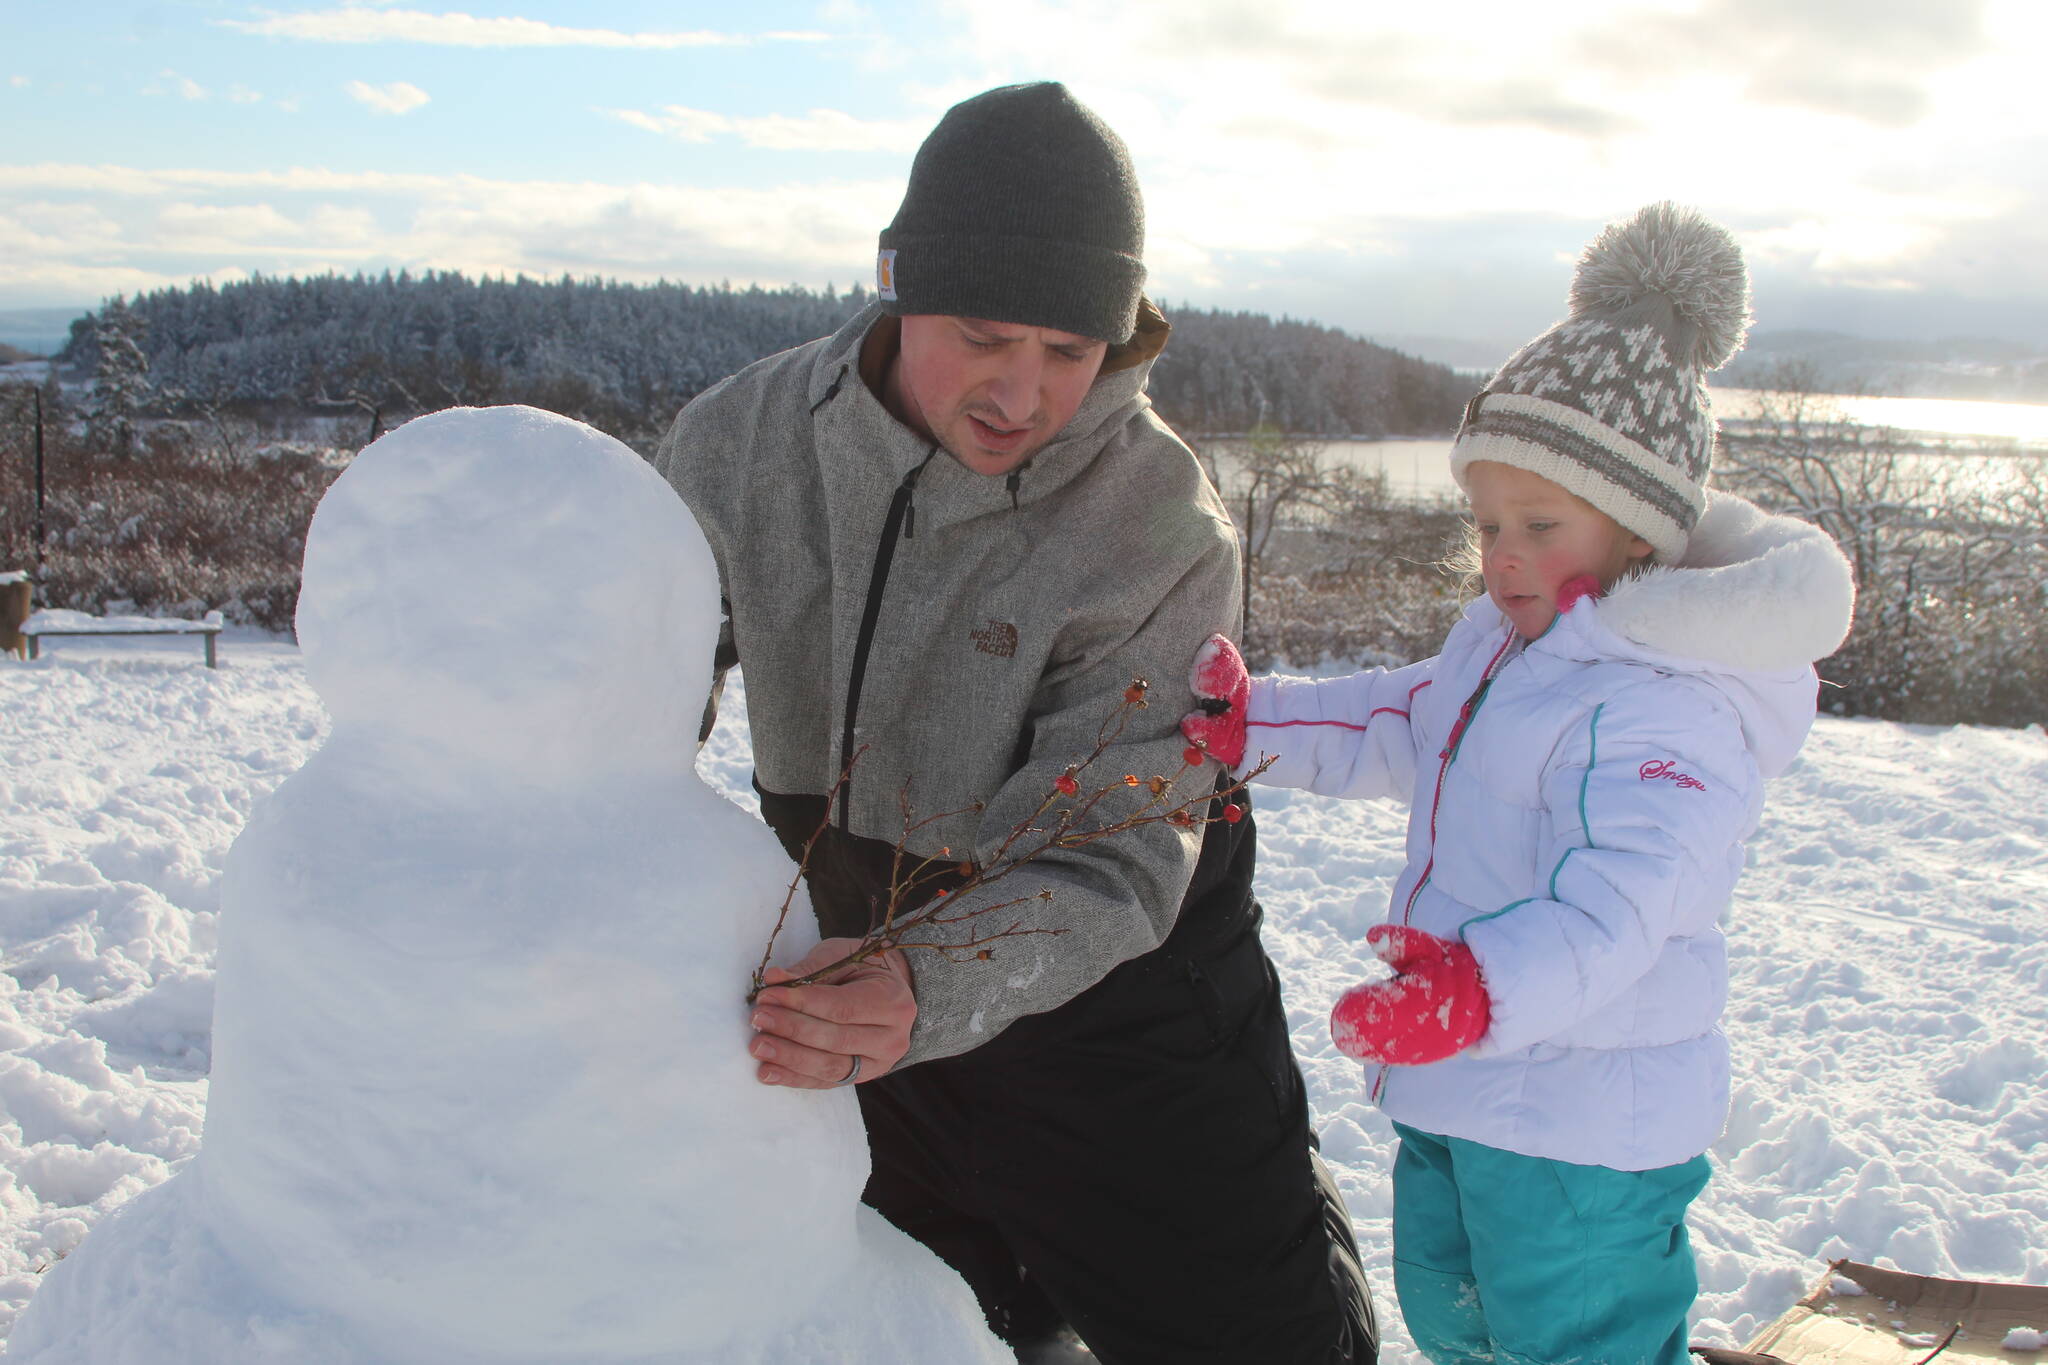 Corey Butler and his 3-year-old daughter, Tiffany, build a snowman together Tuesday afternoon in Oak Harbor. (Photo by Karina Andrew/Whidbey News-Times)